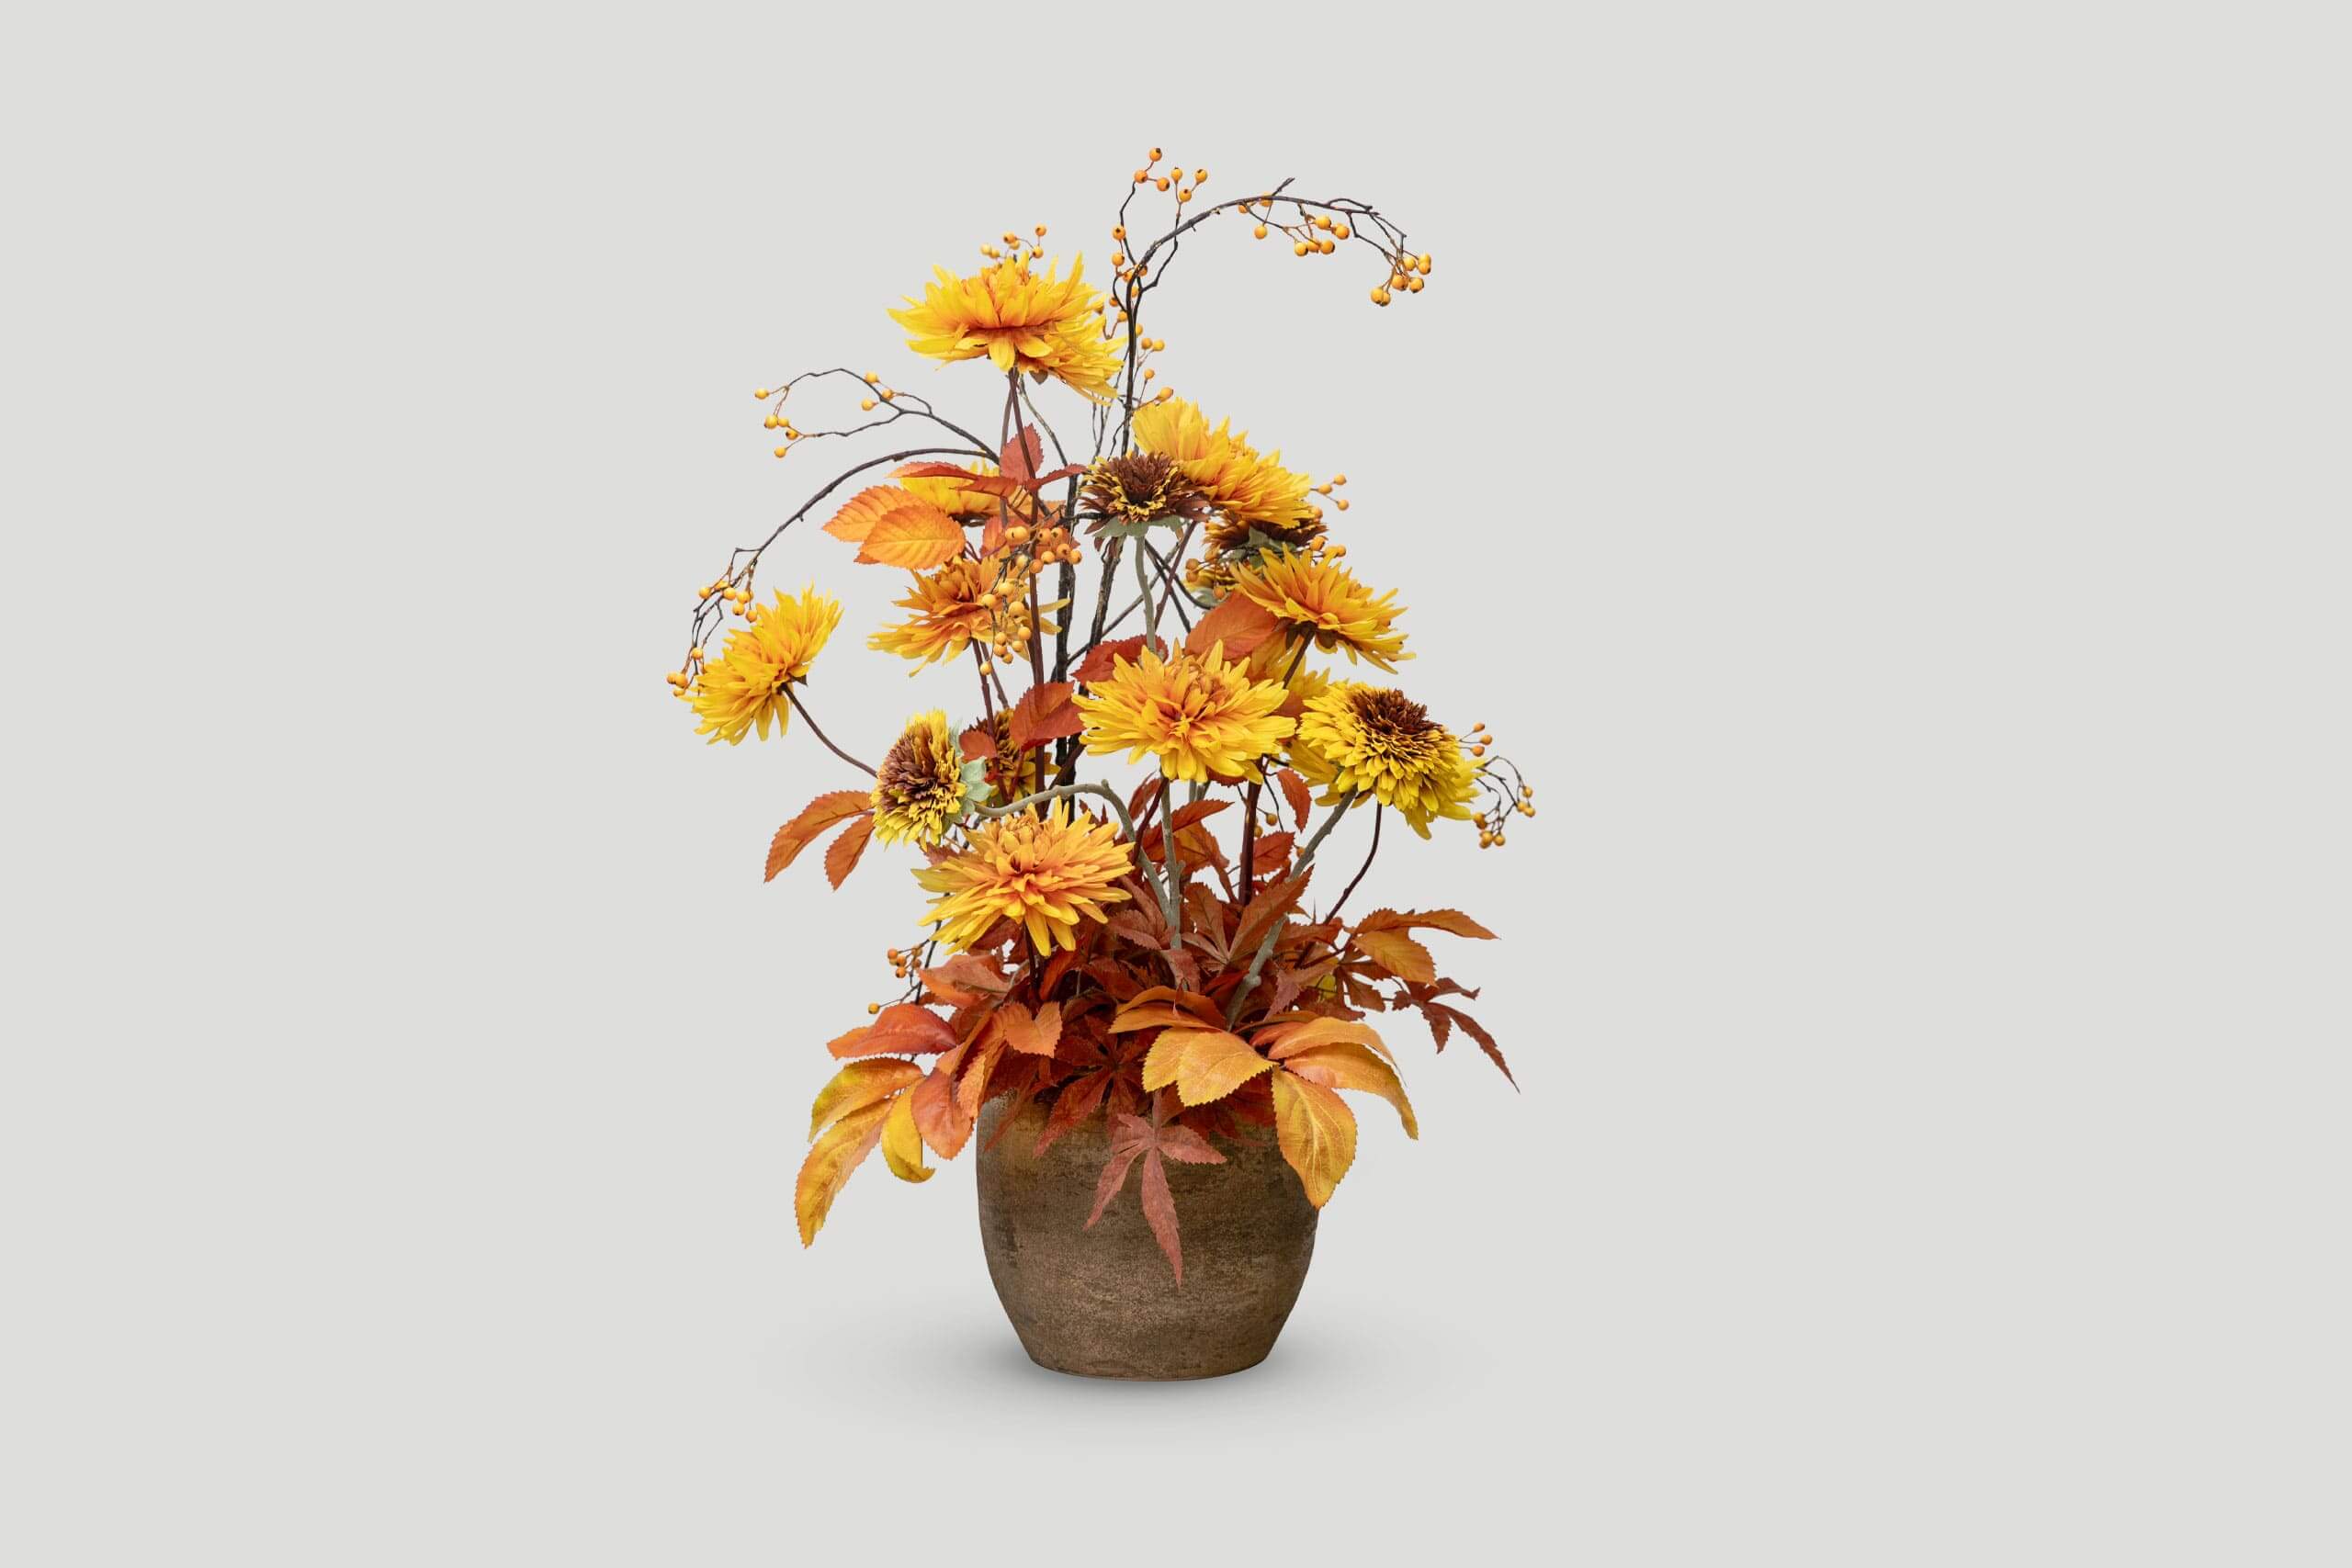 Rustling Leaves - Fall Flower Collection